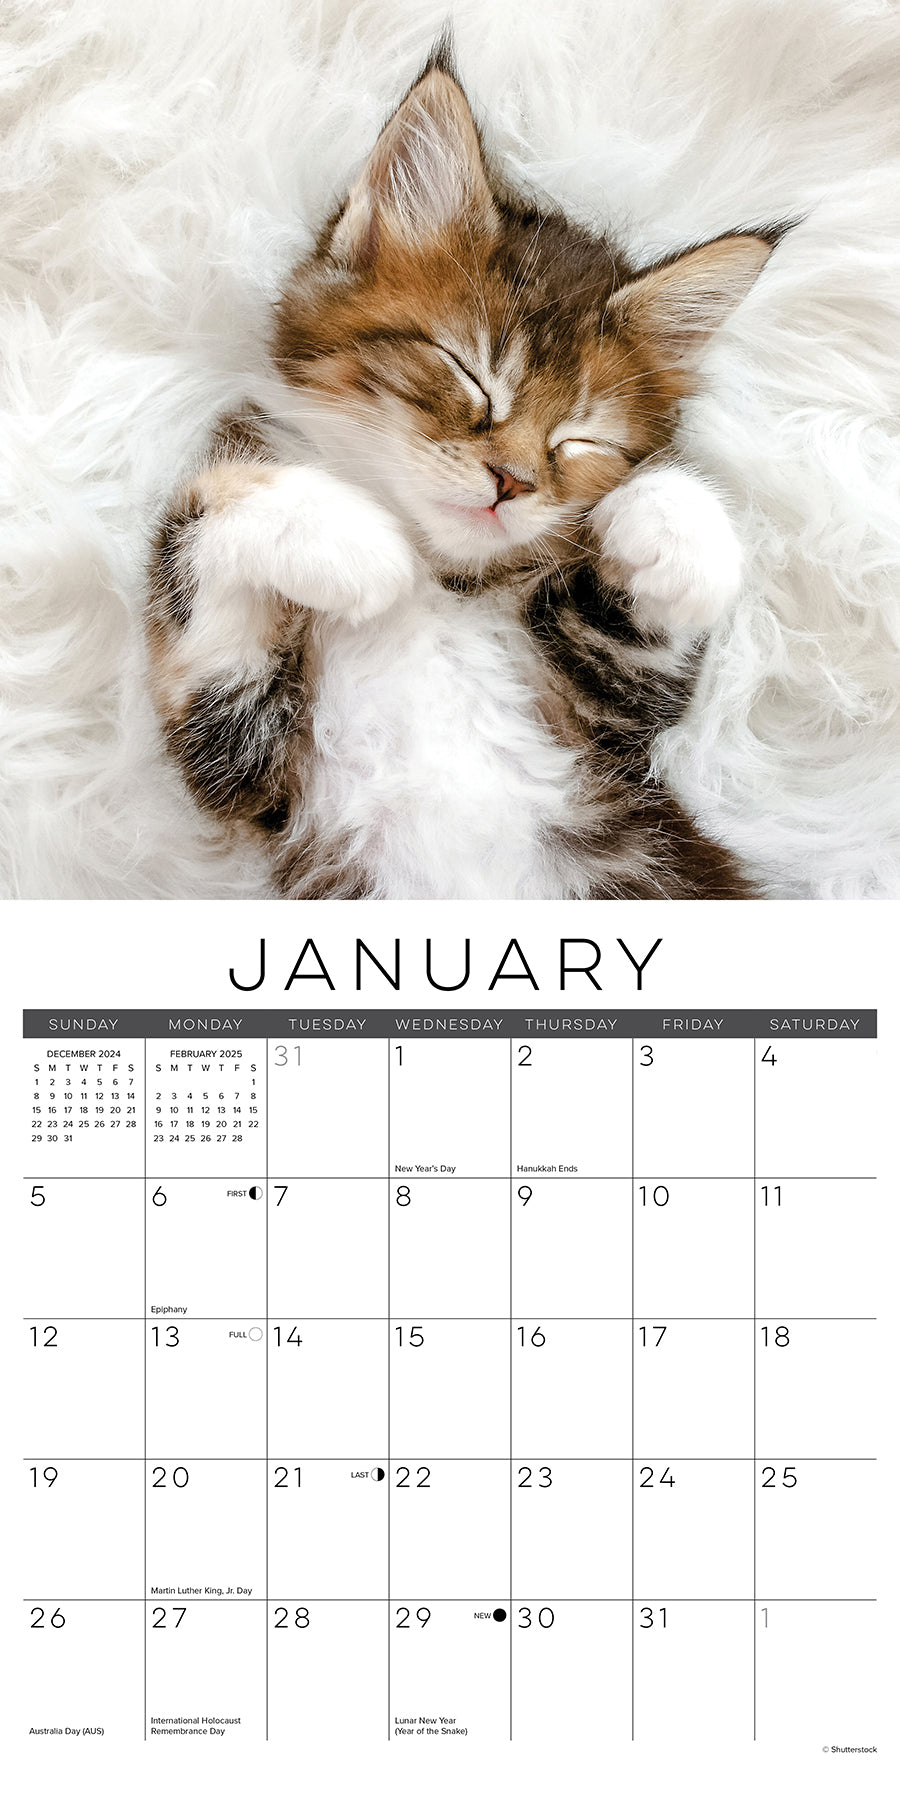 2025 Naptime: A Cat's Favorite Pastime - Square Wall Calendar